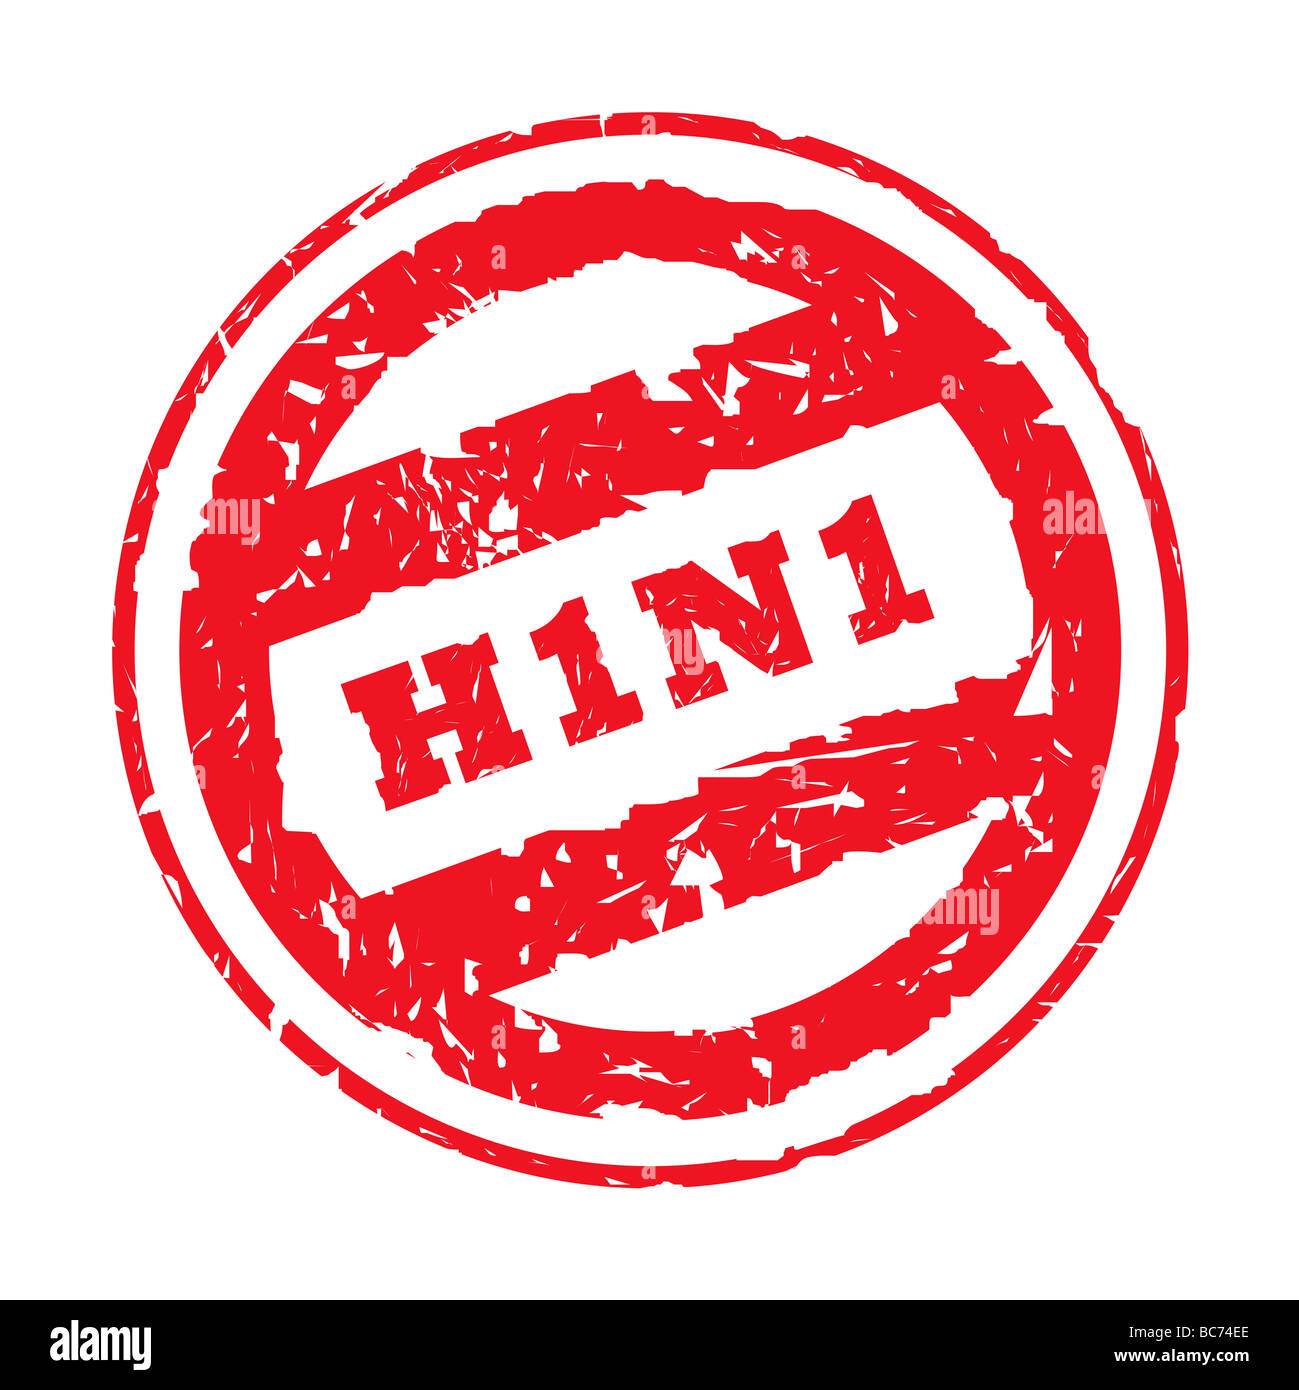 Used red swine flu stamp with H1N1 virus isolated on white background Stock Photo